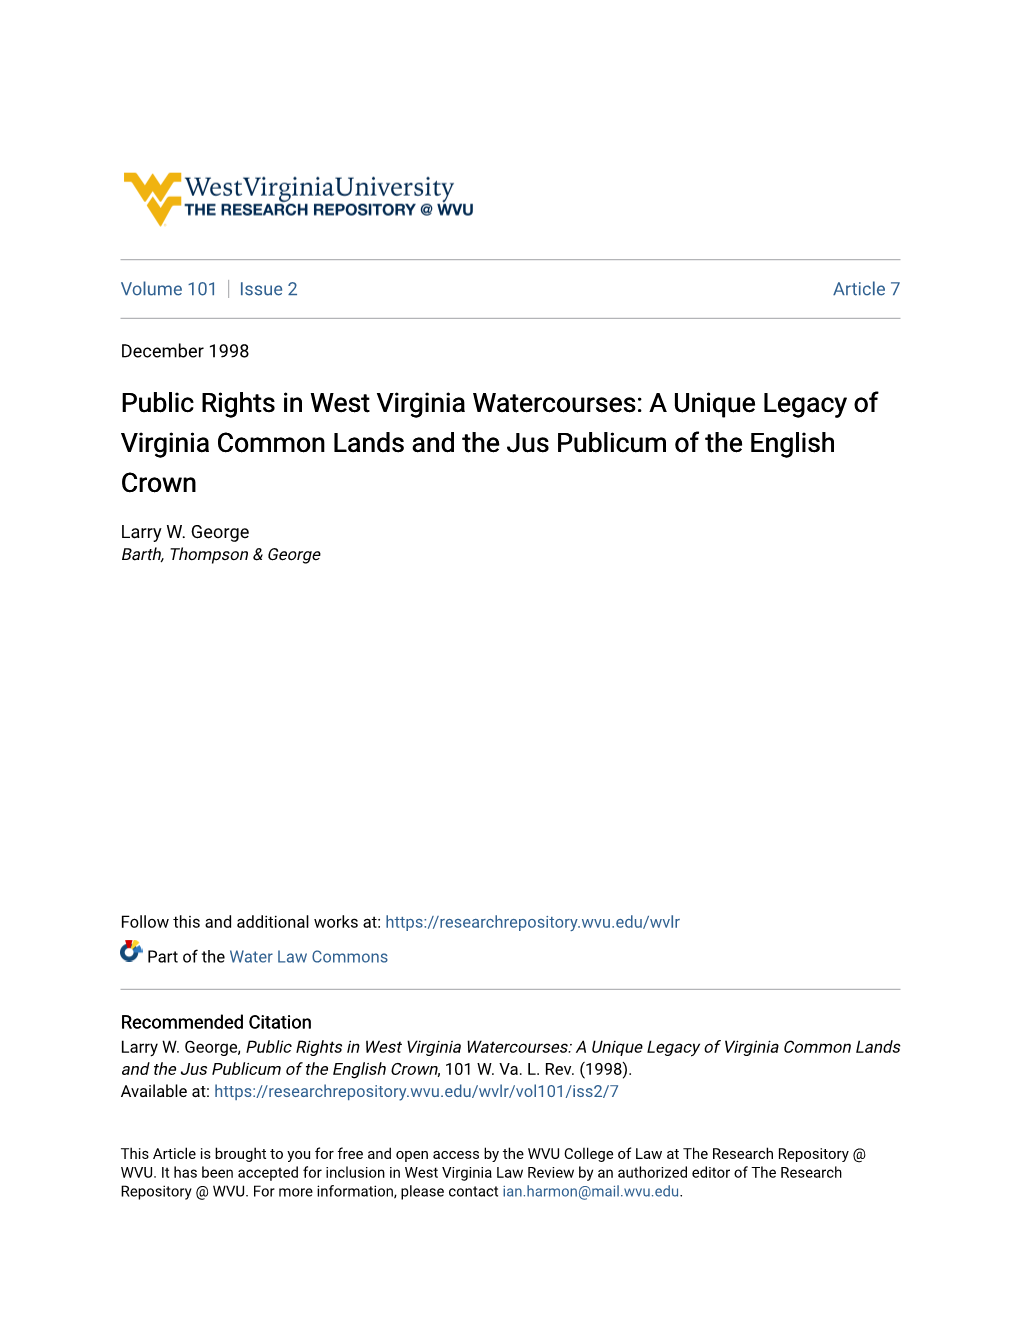 Public Rights in West Virginia Watercourses: a Unique Legacy of Virginia Common Lands and the Jus Publicum of the English Crown